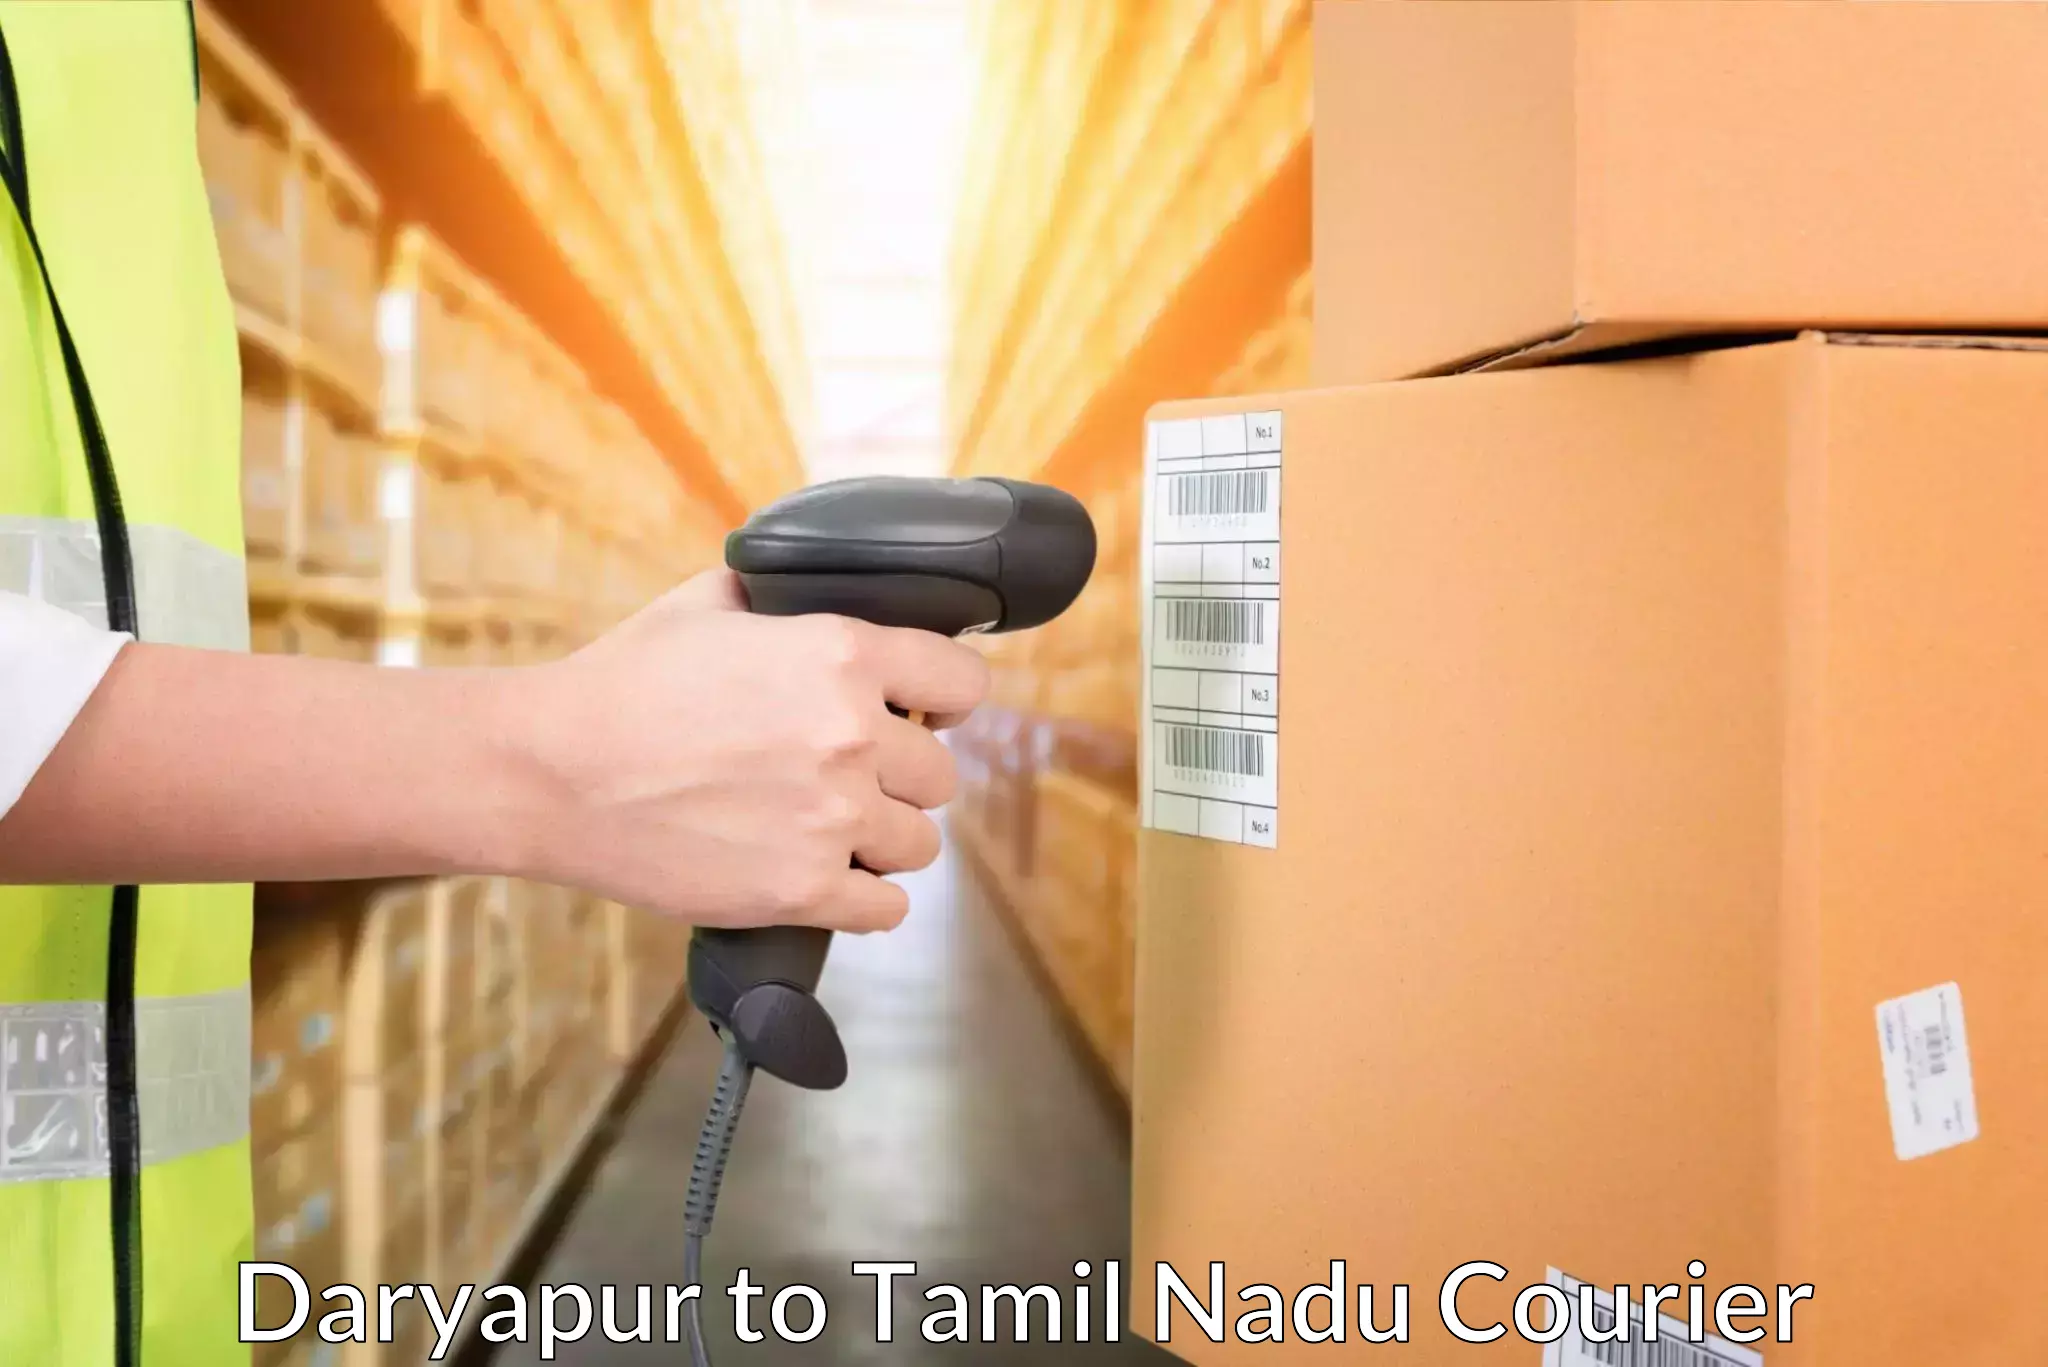 Fast delivery service Daryapur to Udagamandalam